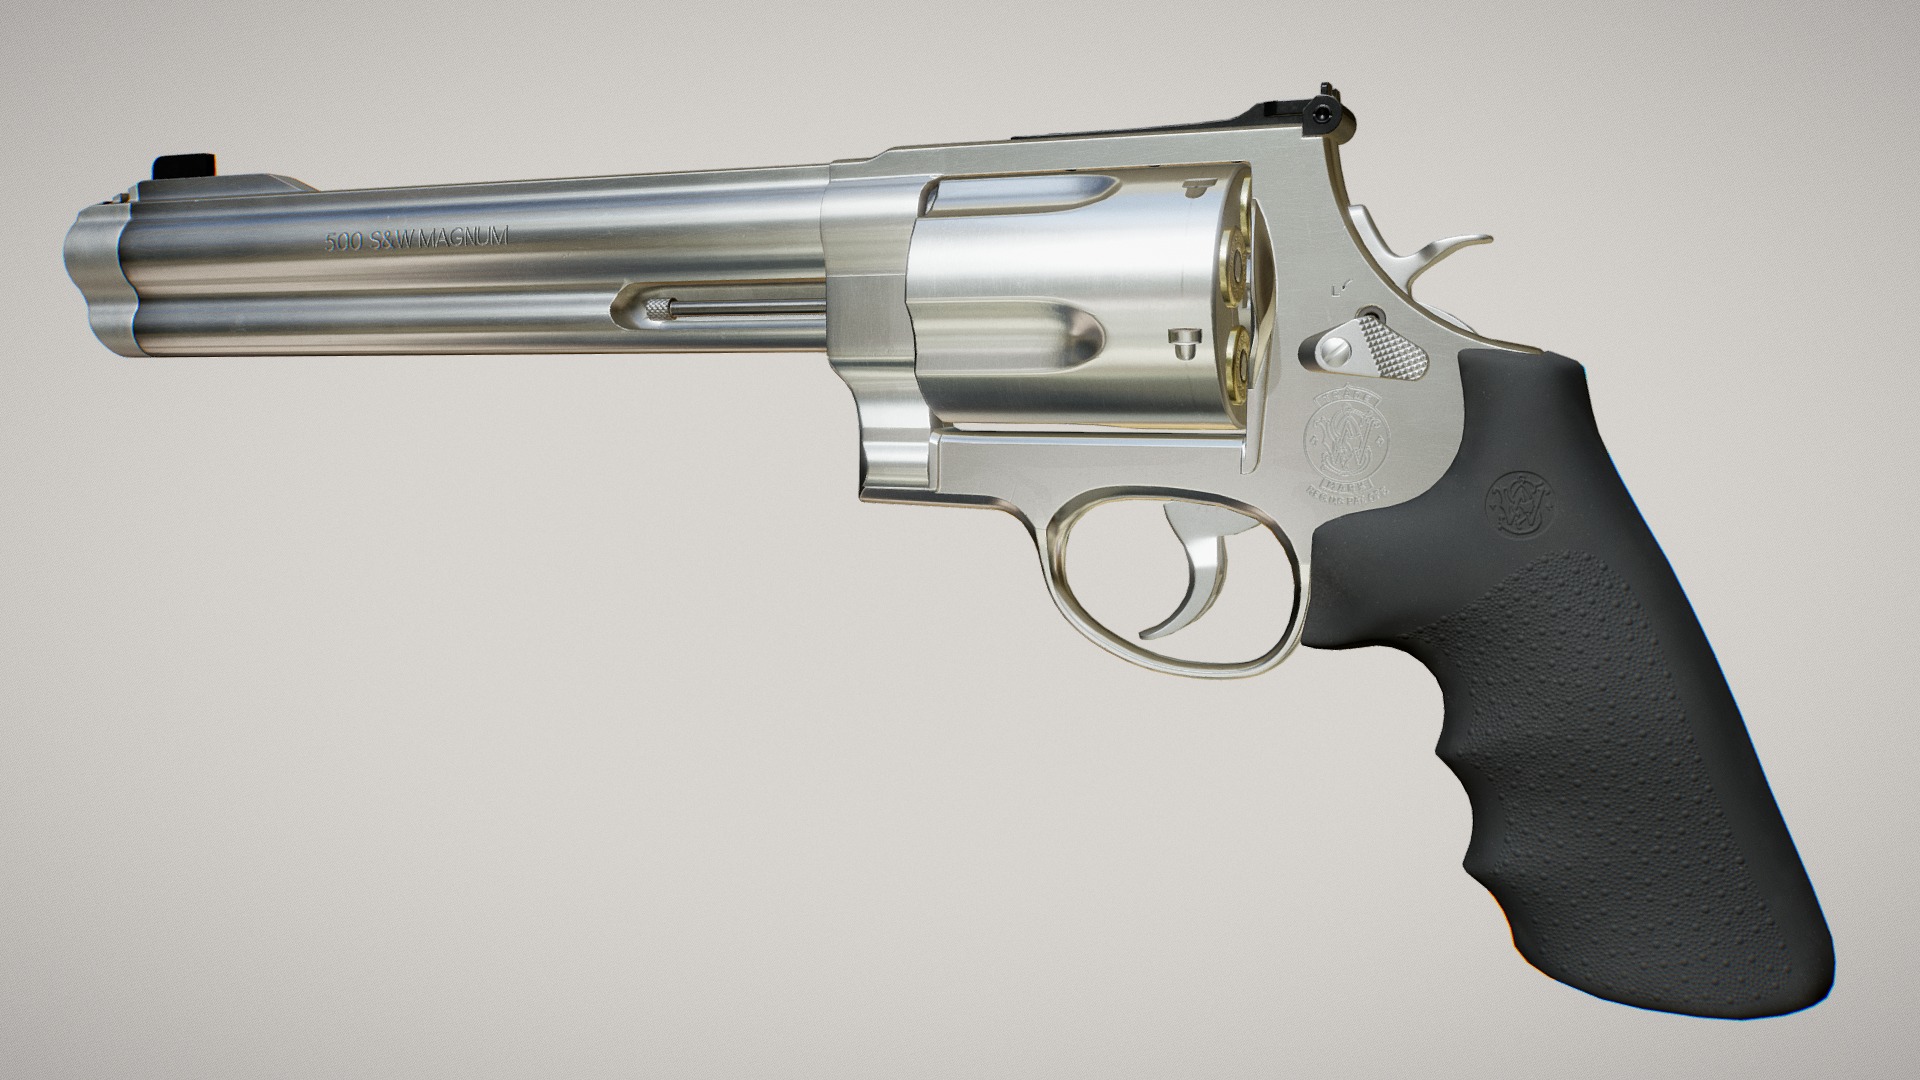 Trying to push my skills up to a pro level. All in all, i think this project turned out very well, though there are a handful of minor faults and mistakes made in the modeling of the gun. It's hard to get every little detail 100% correct when you rely on google images.

Modeled in Maya, animated in Maya, textured in Substance Painter.

Time: n/a - Smith & Wesson 500 Magnum - Download Free 3D model by Ole Gunnar Isager (@FrenchBaguette) 3d model